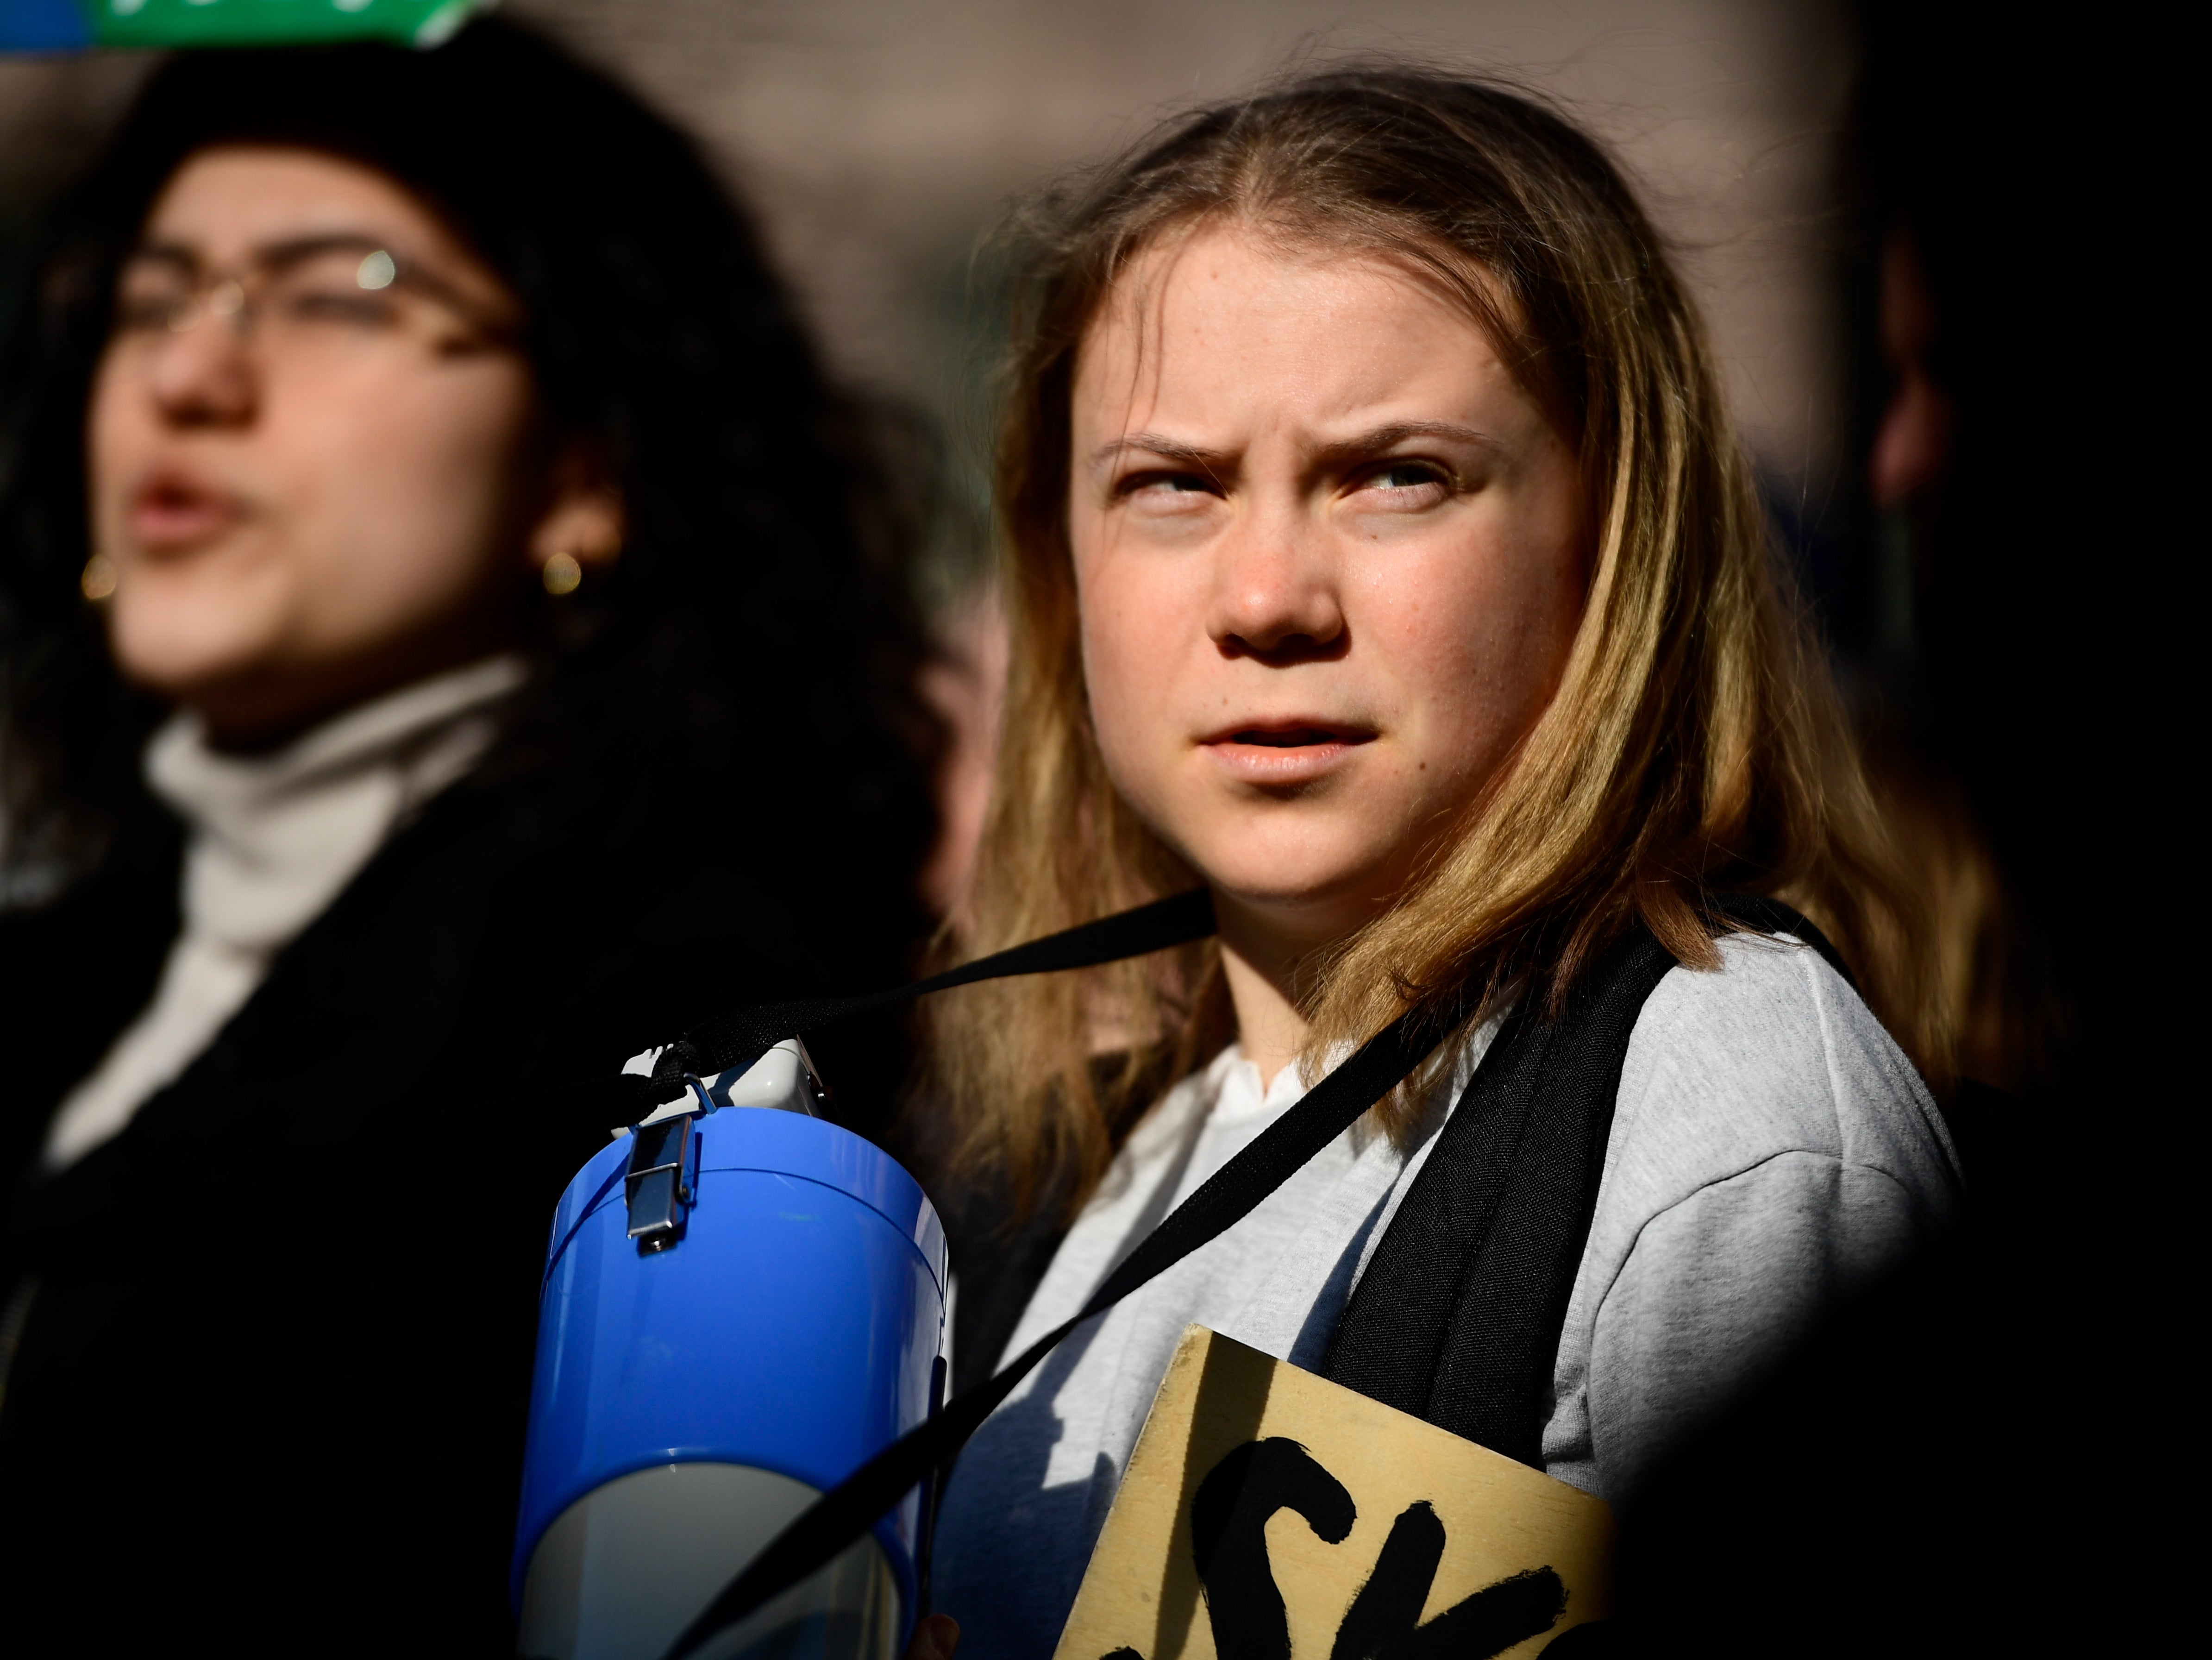 Greta Thunberg has hit out at people celebrating the planet on Earth Day while ‘at the same time destroying it’